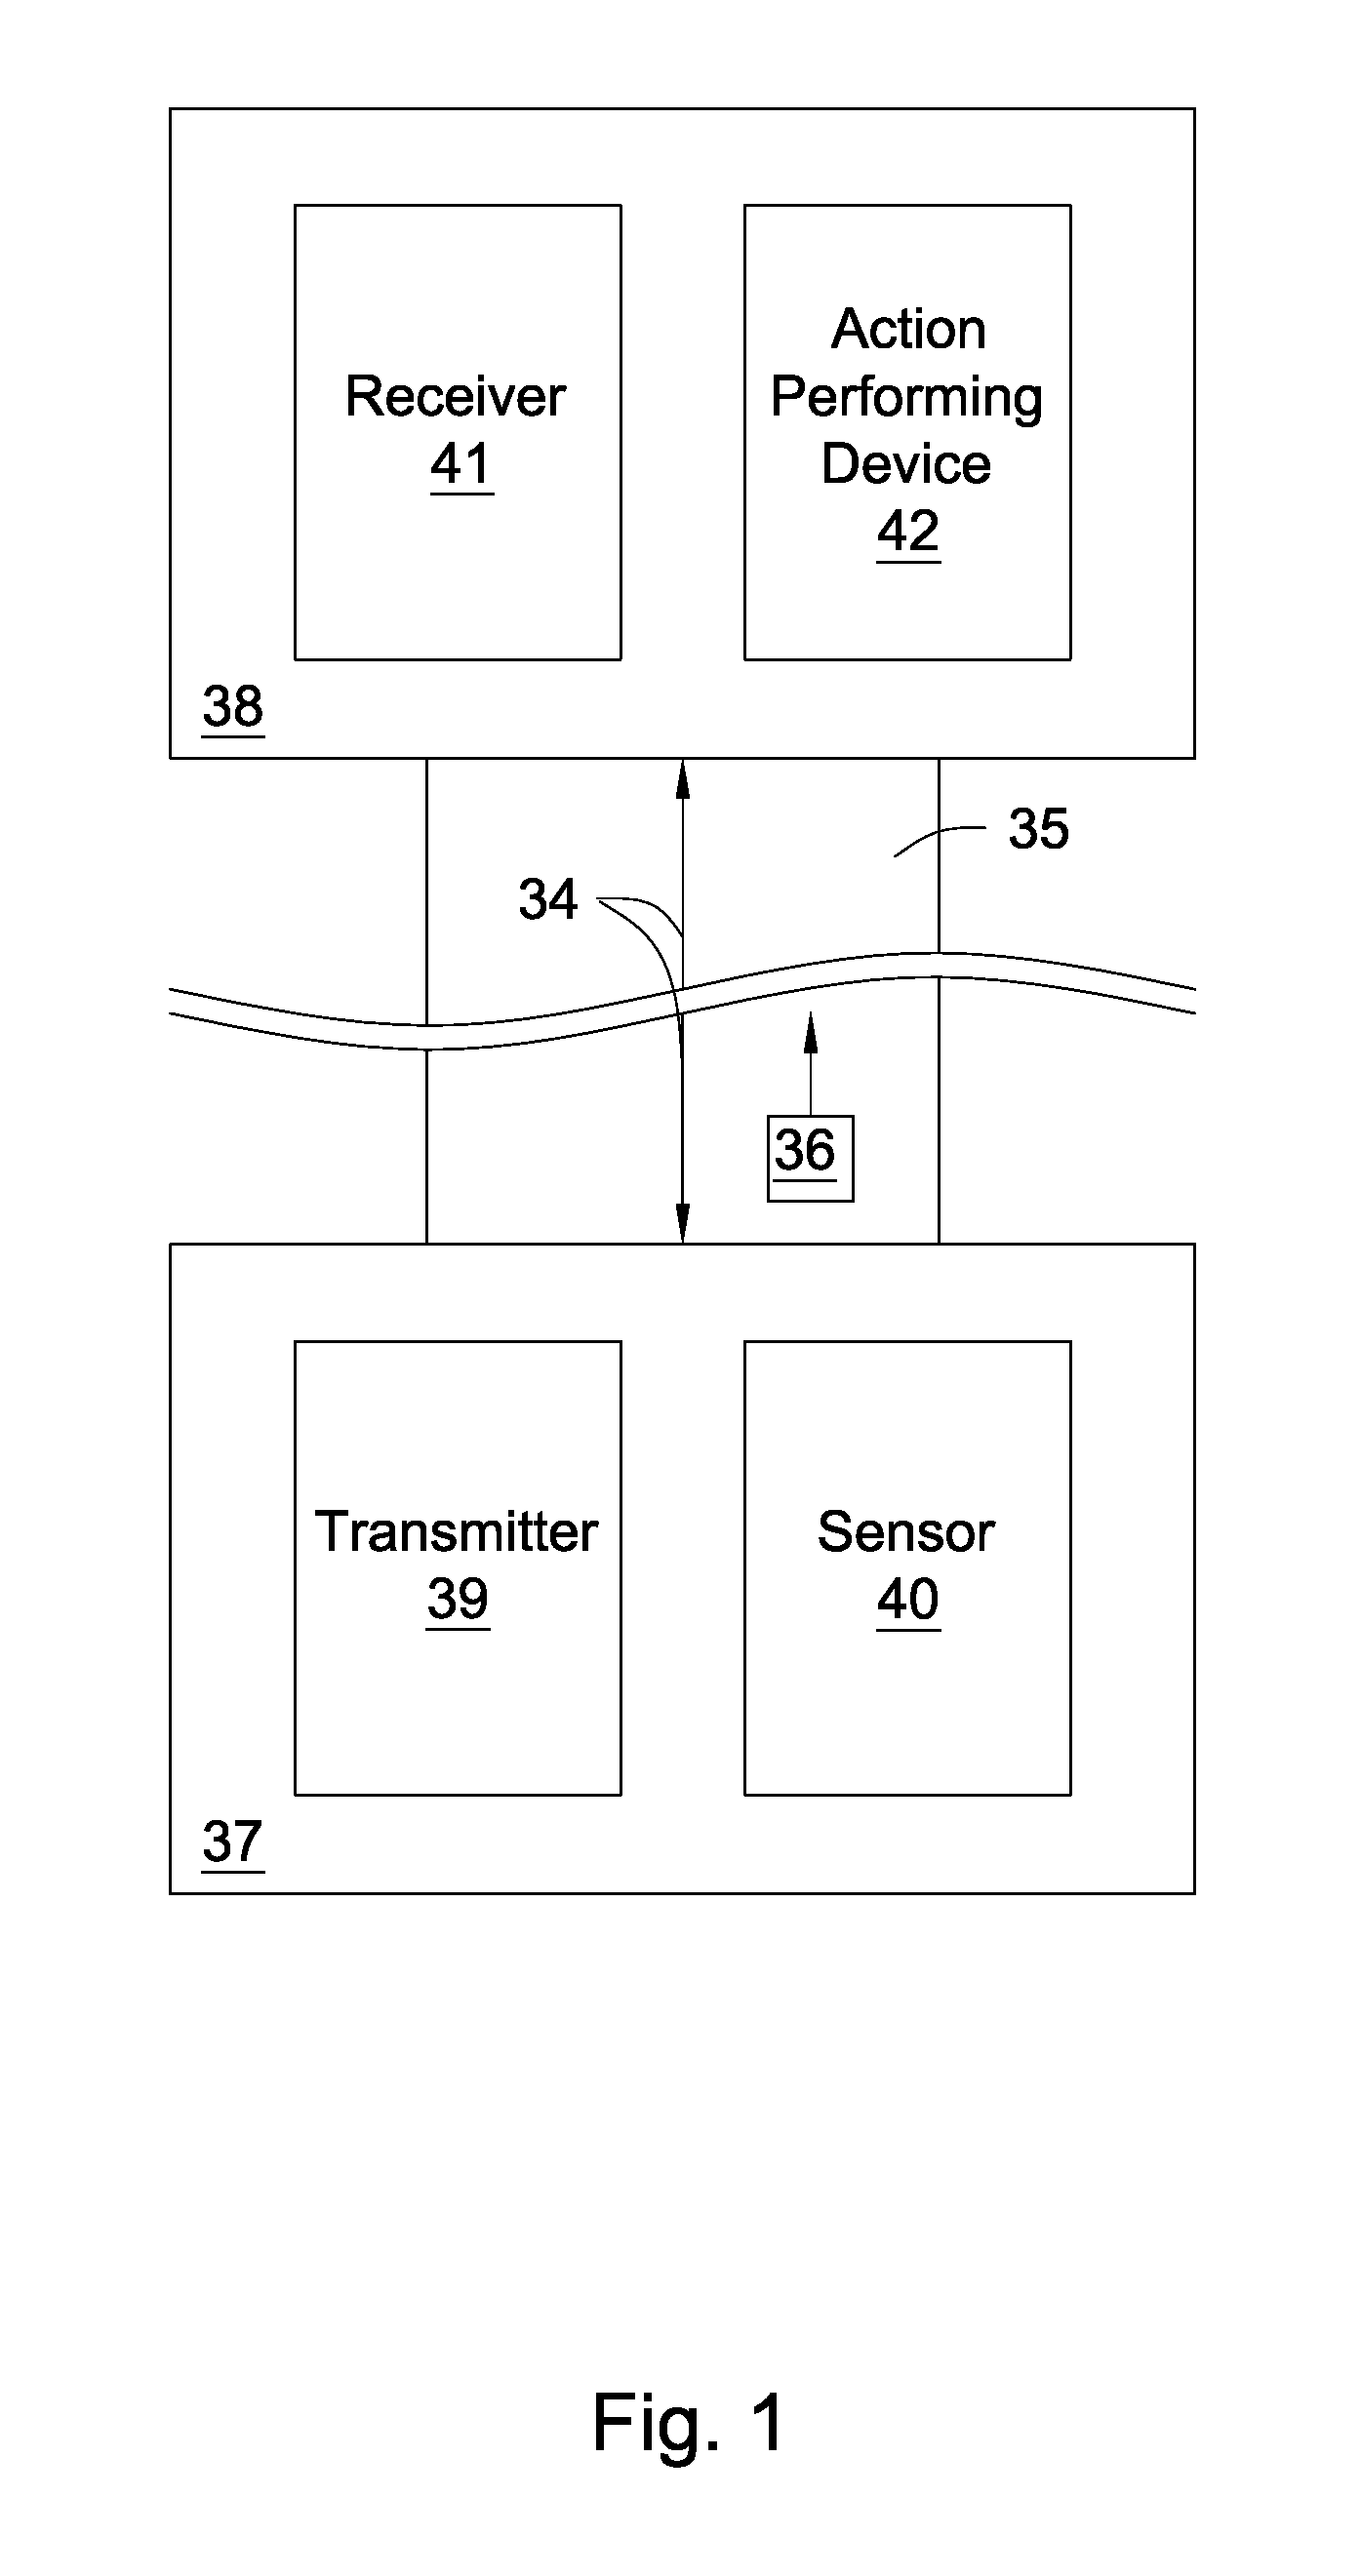 Apparatus for Responding to an Anomalous Change in Downhole Pressure